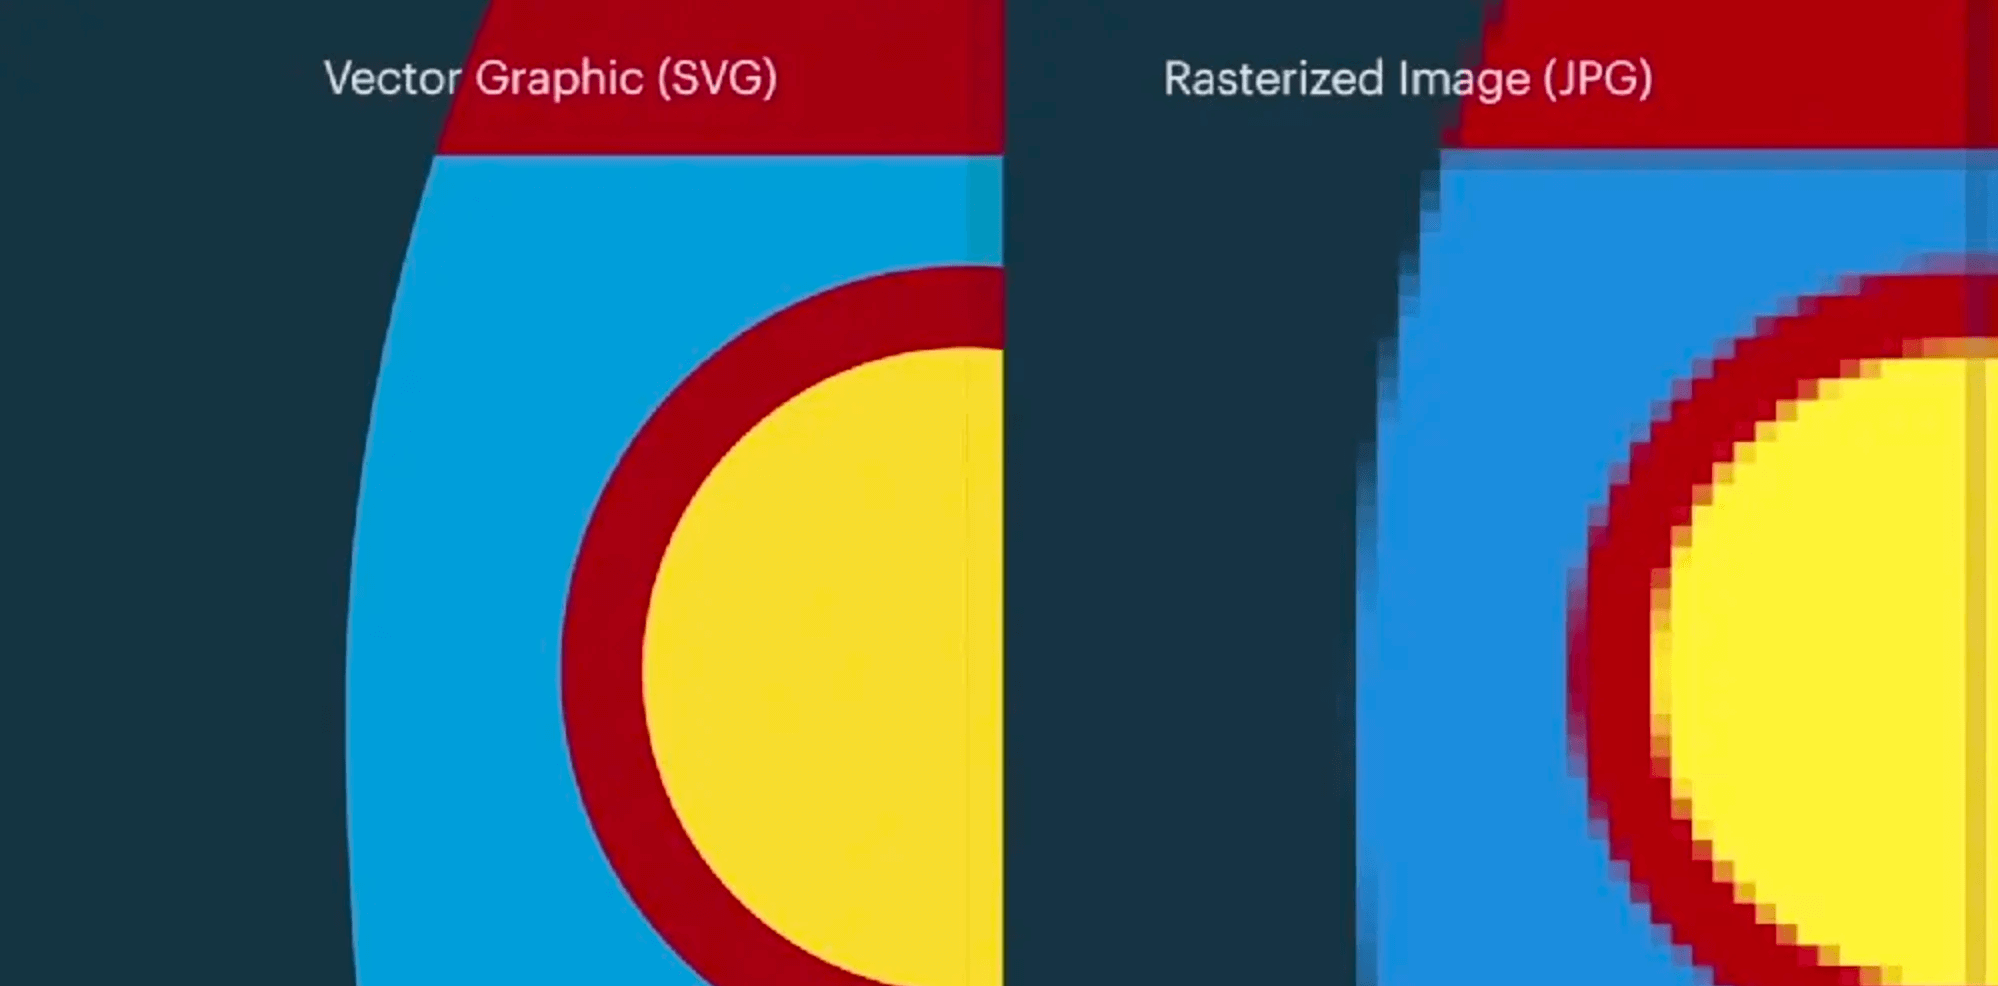 Comparison of the clarity between SVG and PNG or JPG images